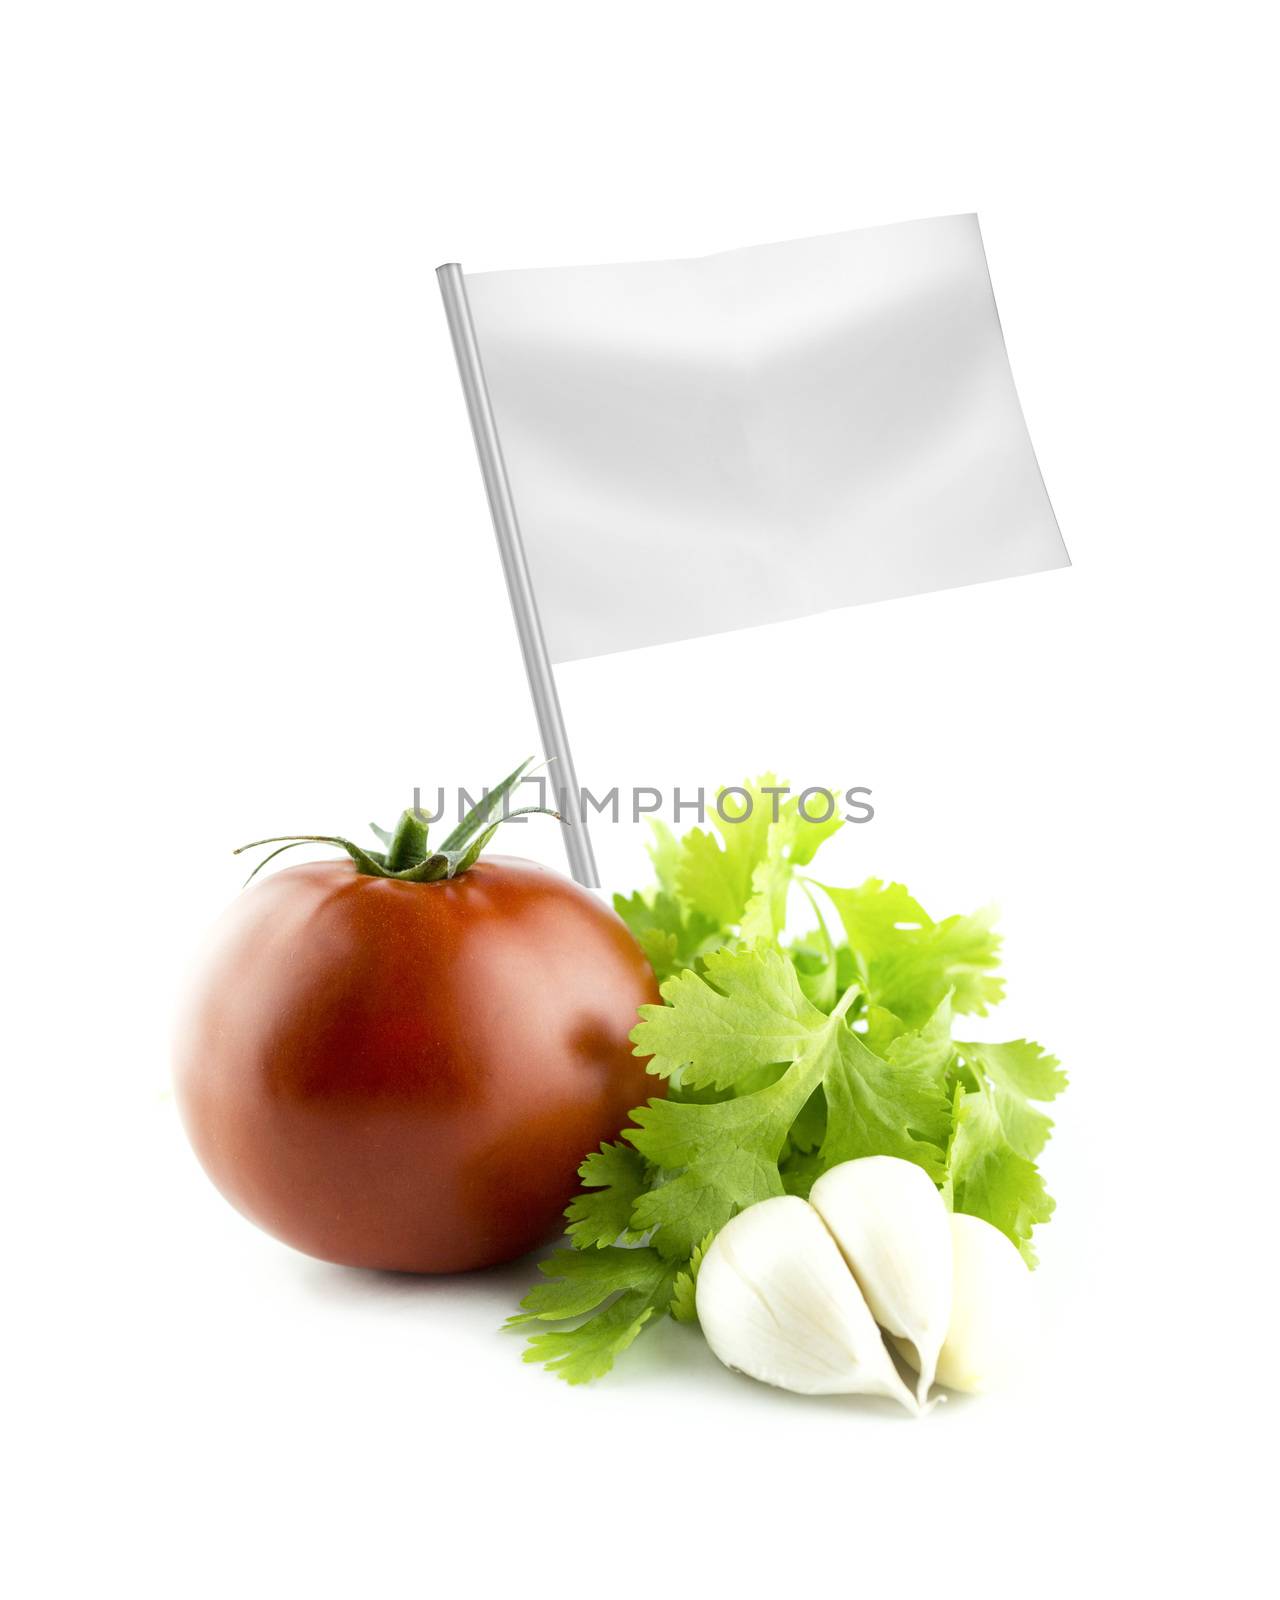 Healthy and organic food concept. Fresh Tomato, garlic and Coriander with flag showing the benefits or the price of fruits.